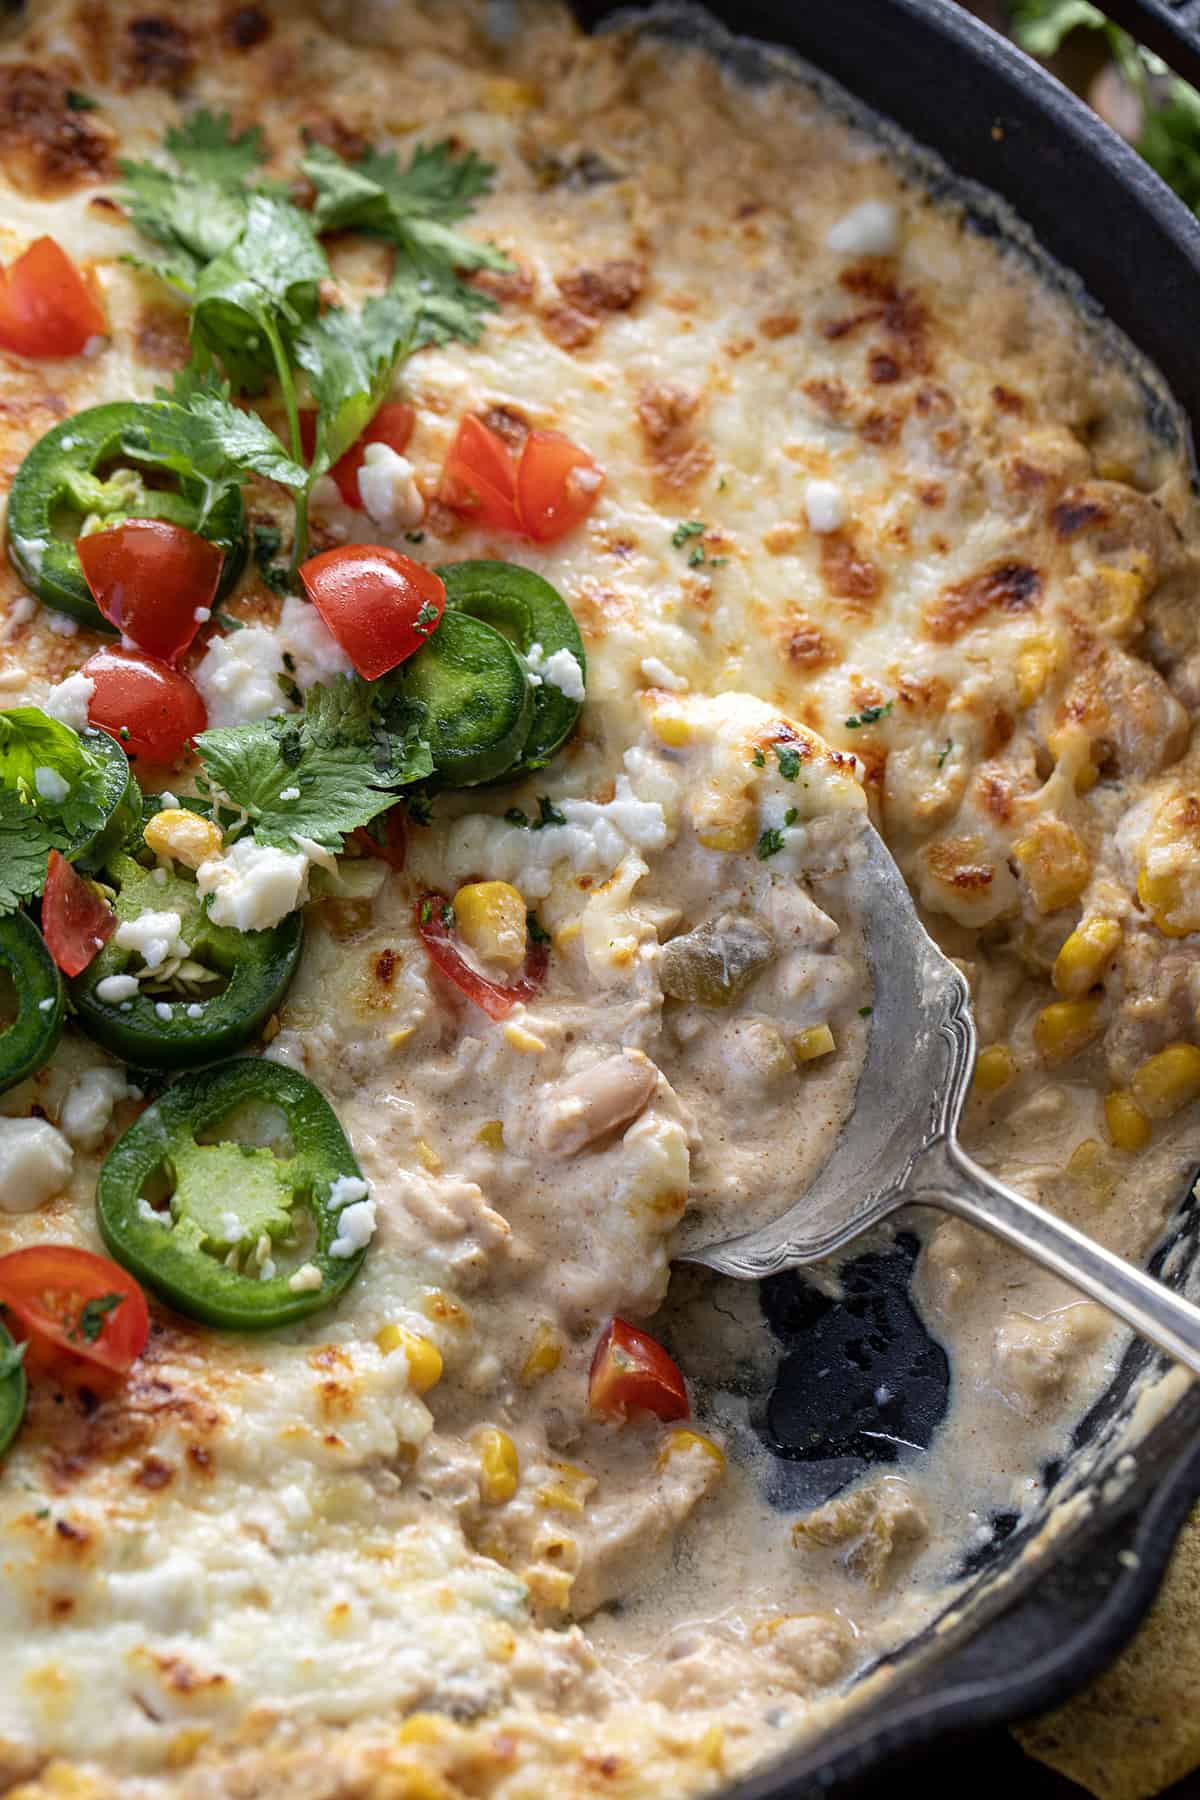 Skillet with Spoon in it with White Bean Chili Cheese Dip.